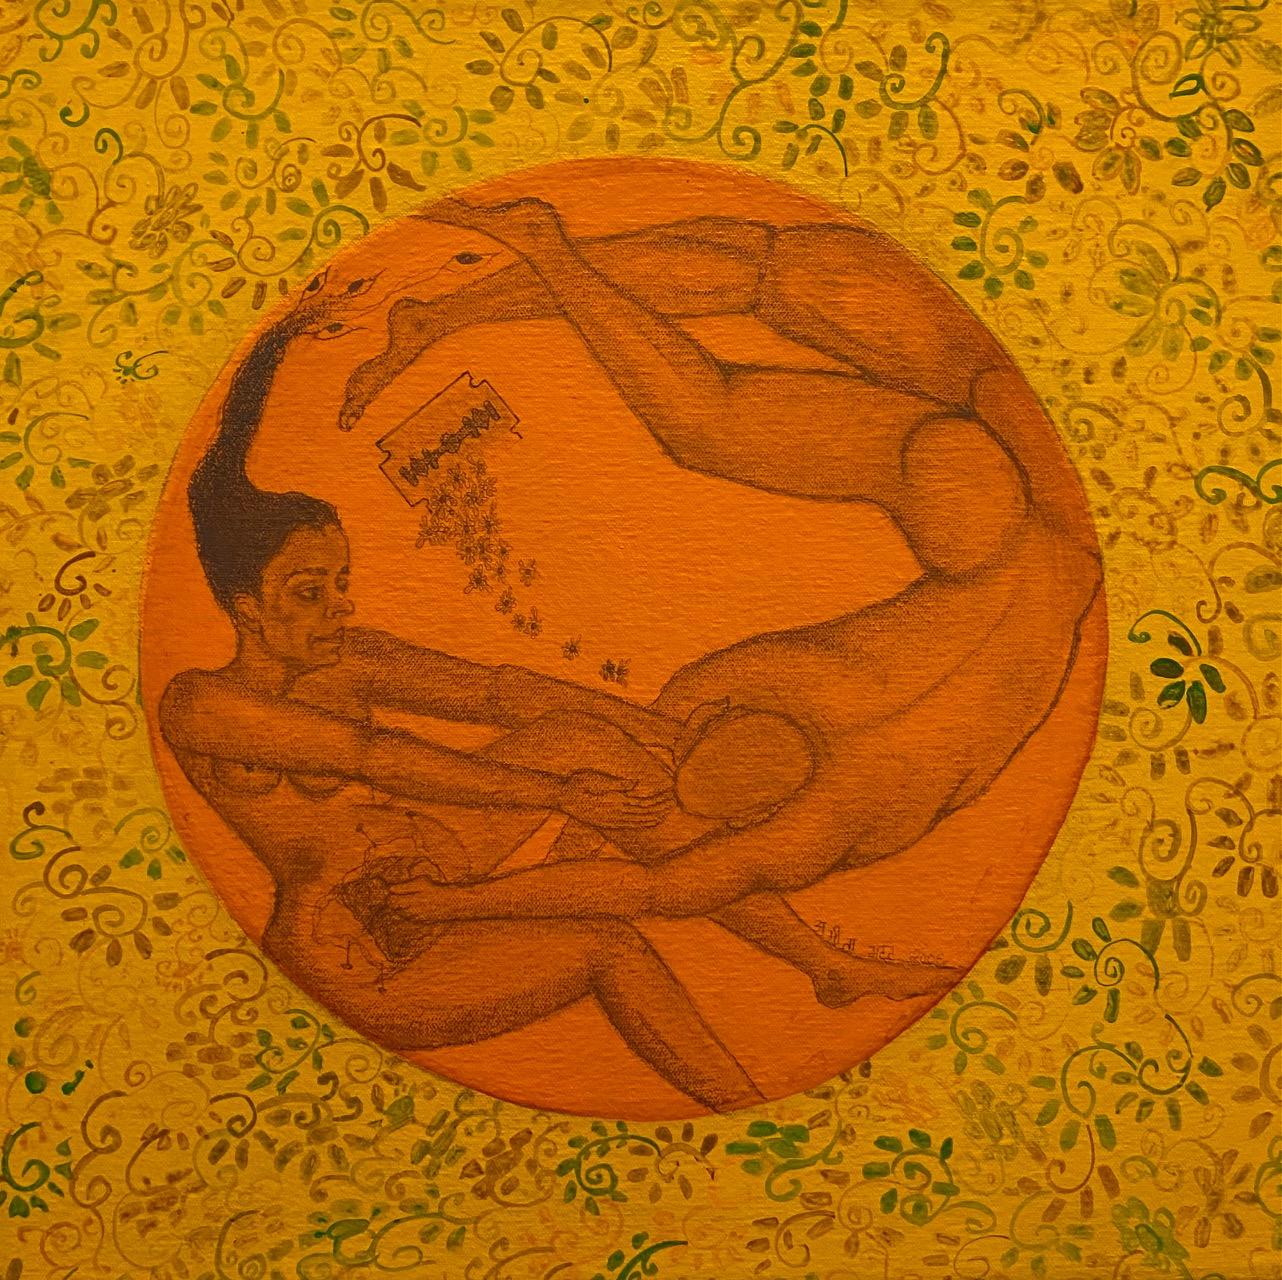 Tat Tvam Asi - You Are Me, Graphite and Acrylic on Canvas, Symbolism, Indian Art